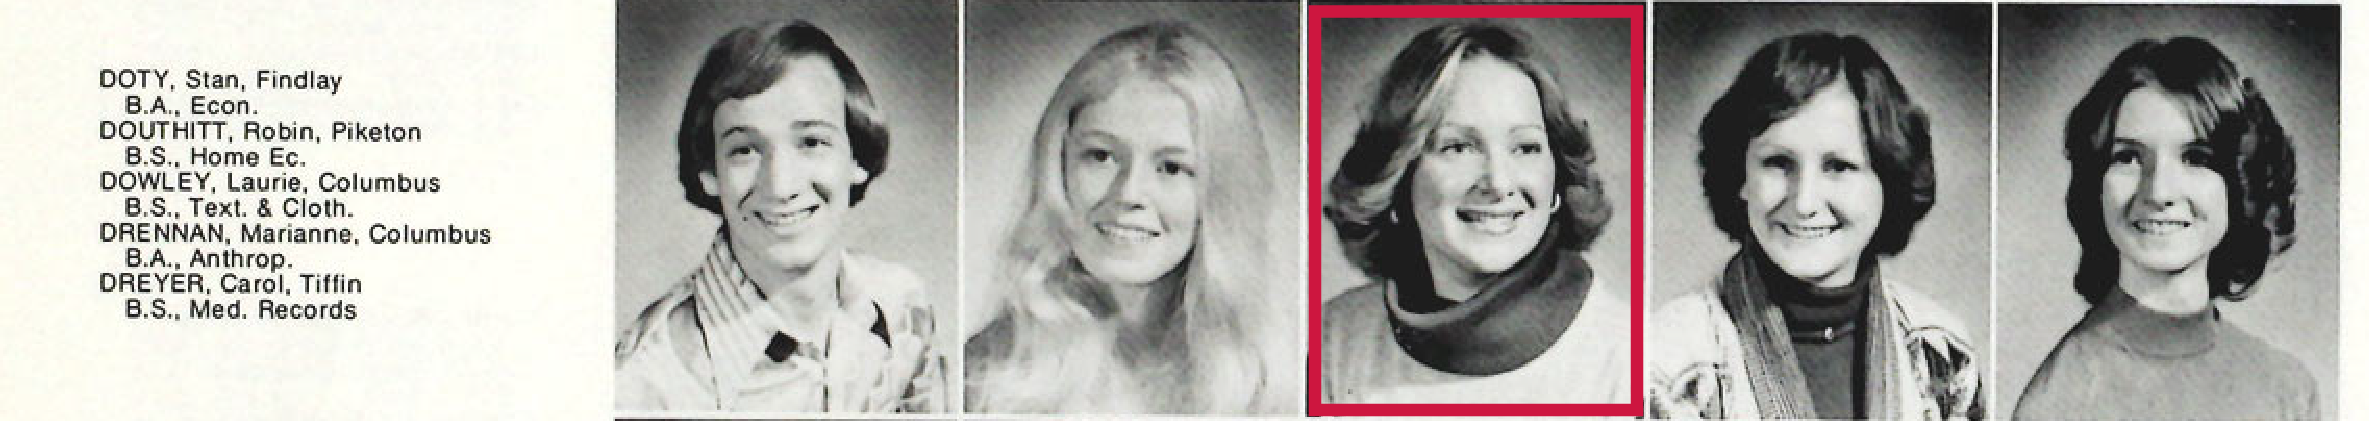 Laurie Dowley year book image from Ohio State